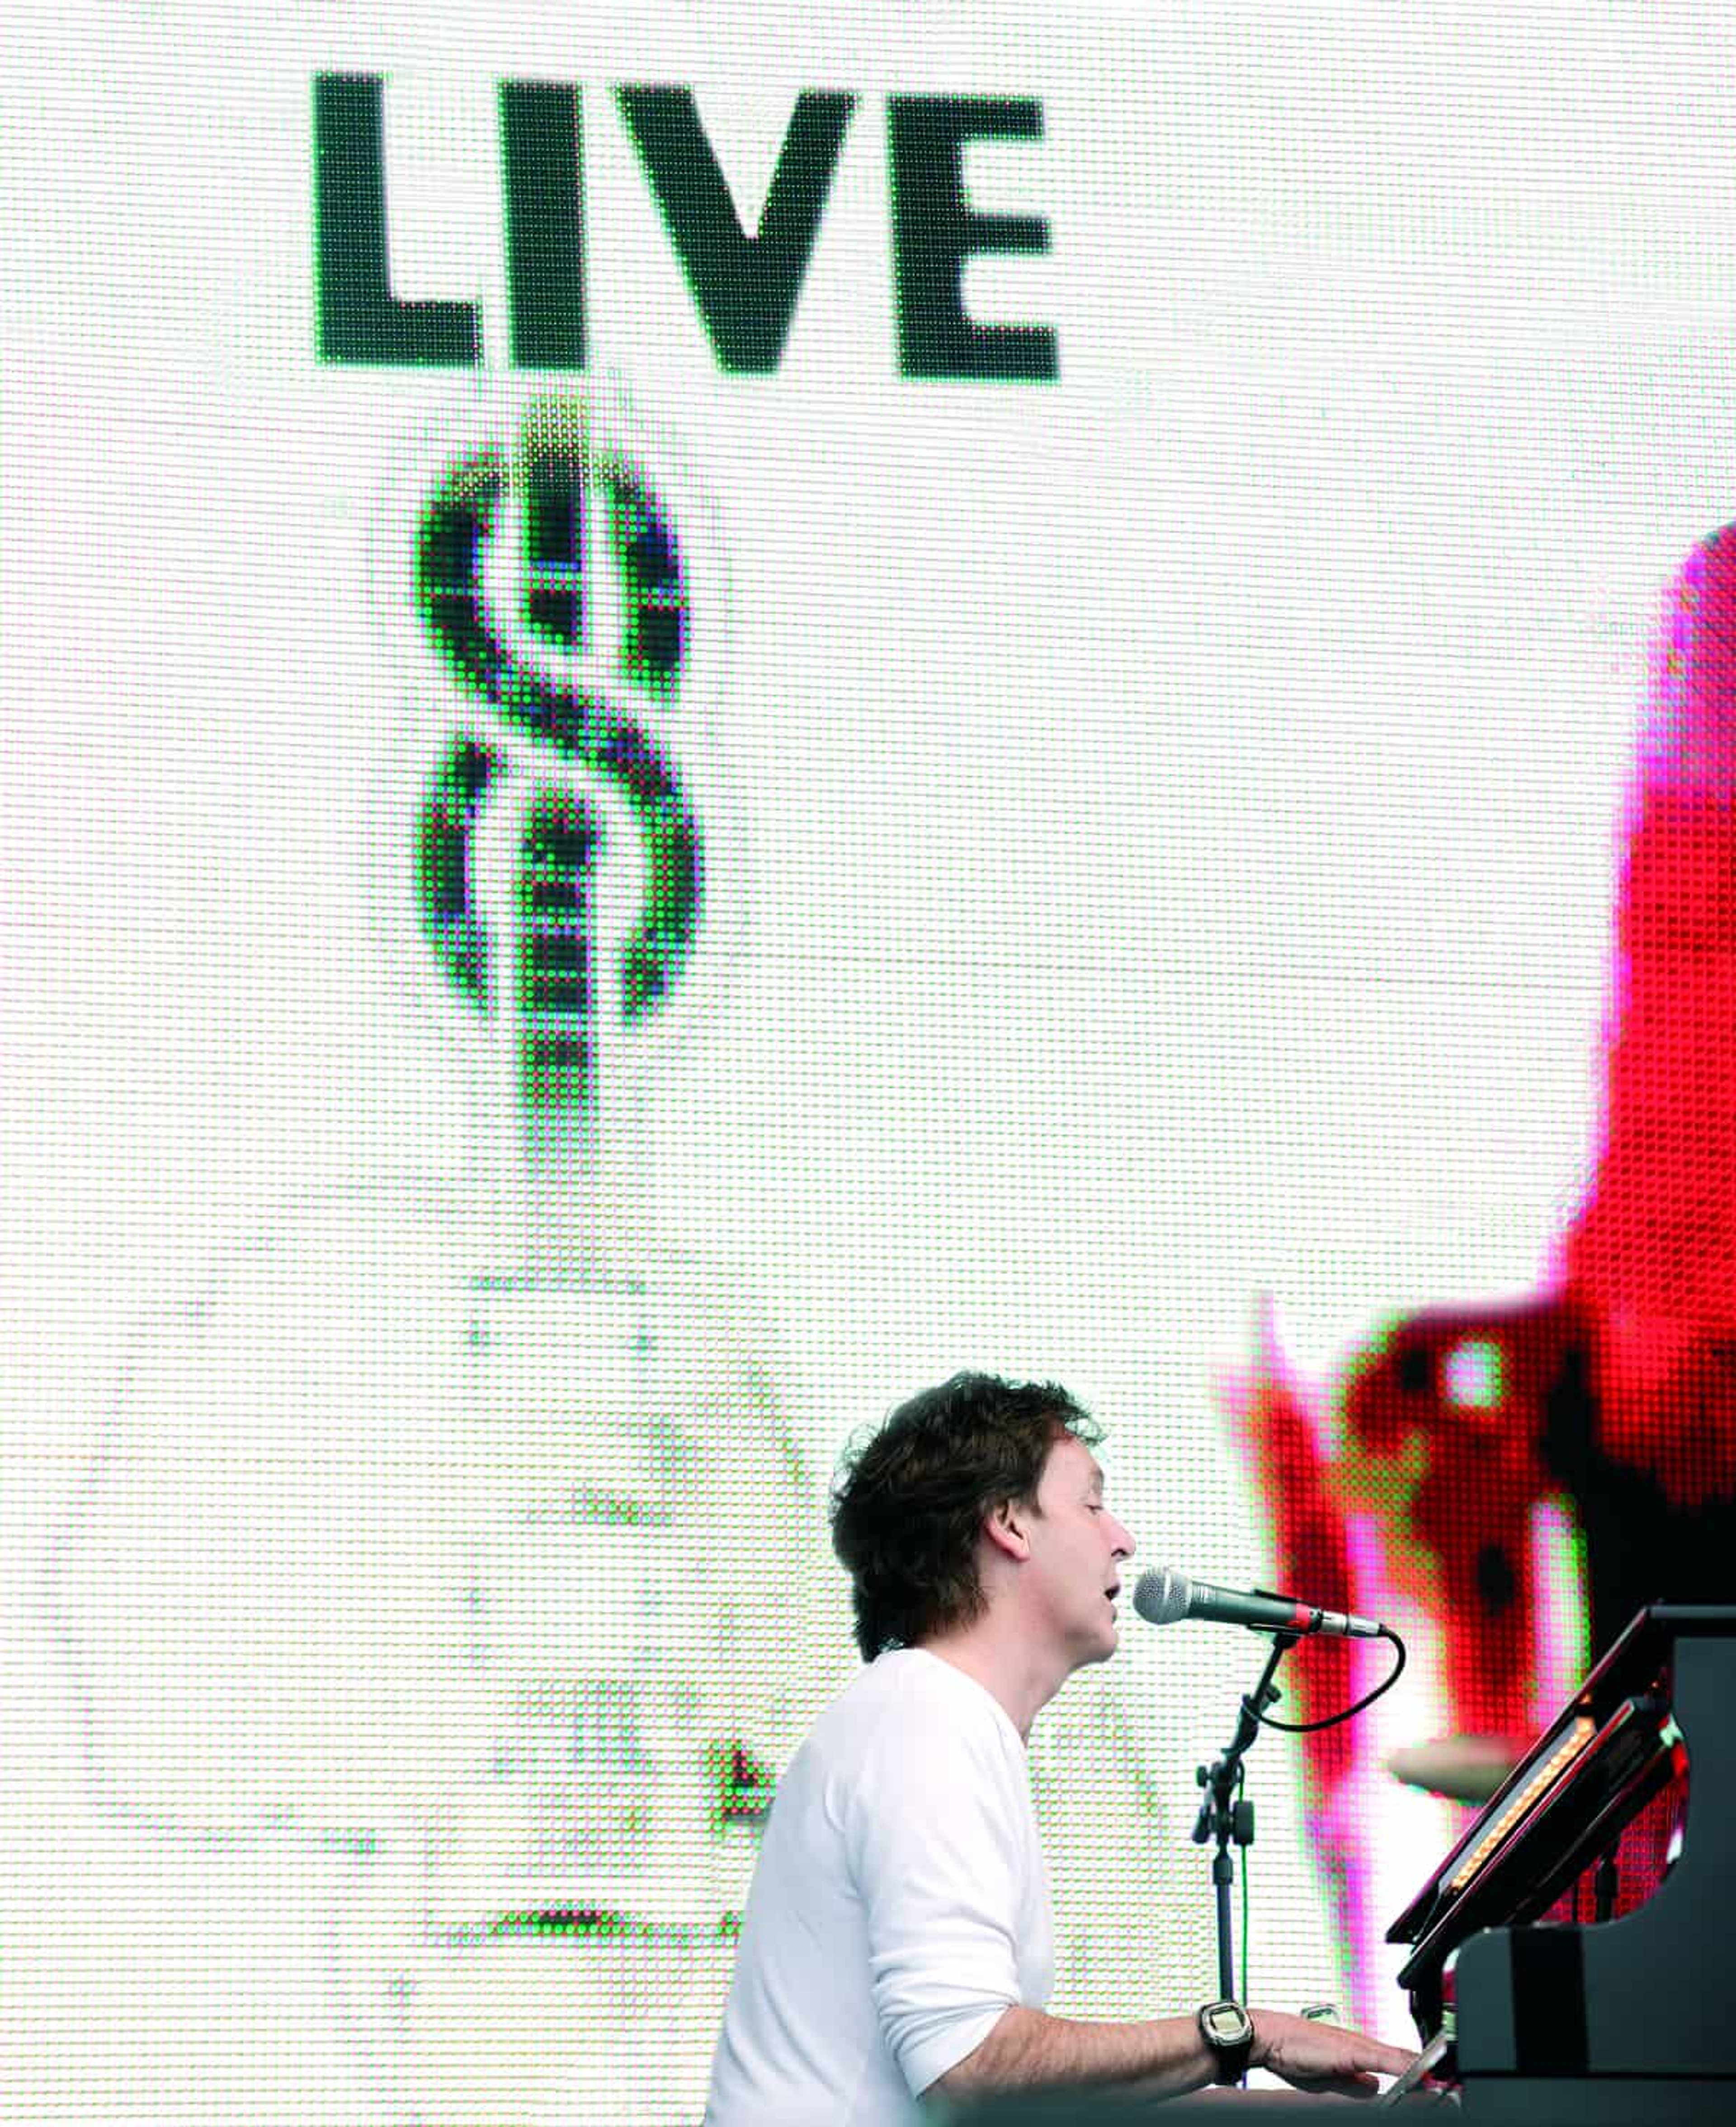 Paul sat at a piano in front of the Live 8 banner